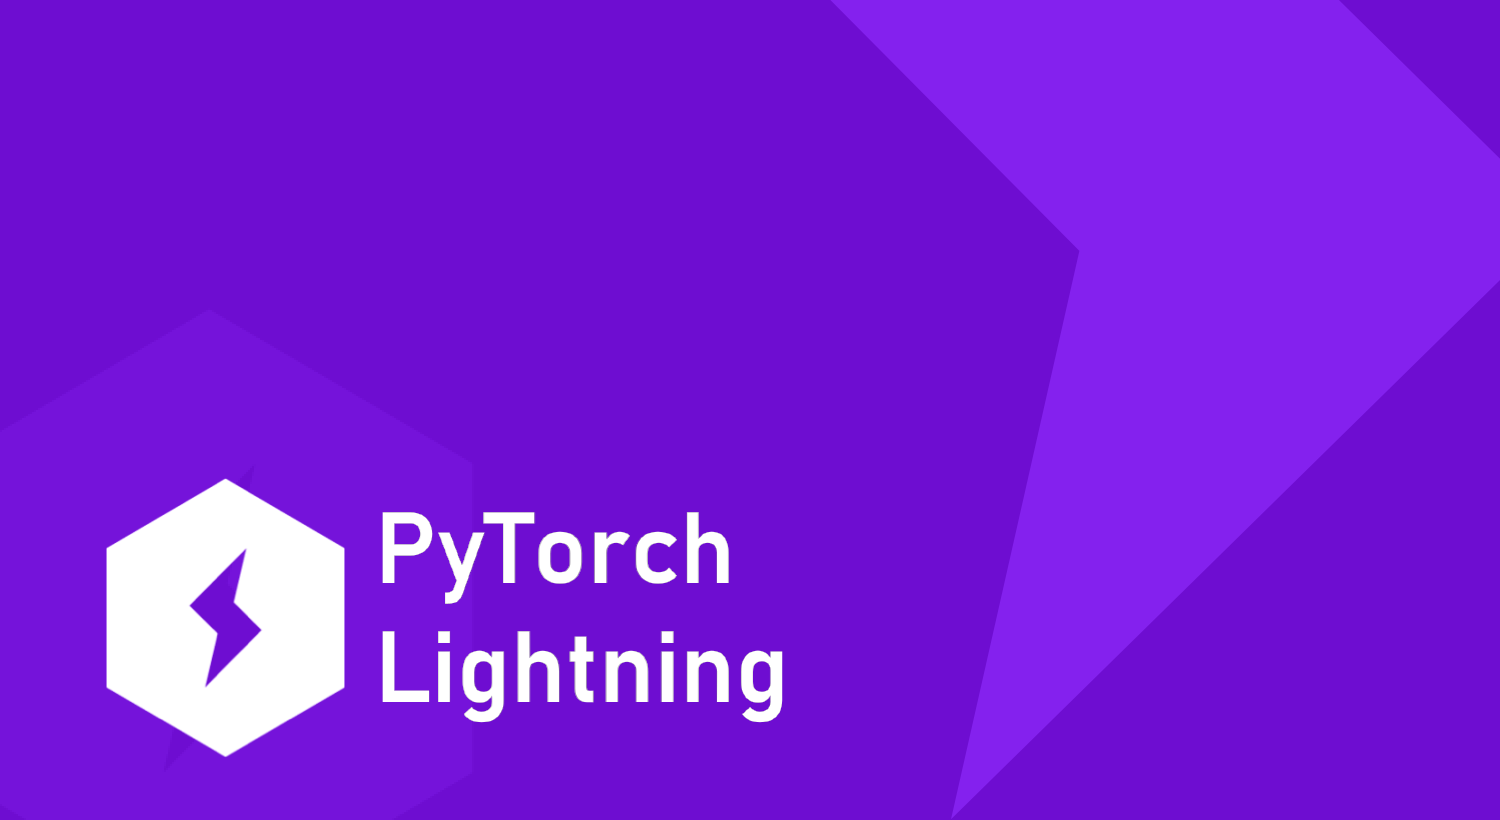 PyTorch Lightning: A Better Way to Write PyTorch Code